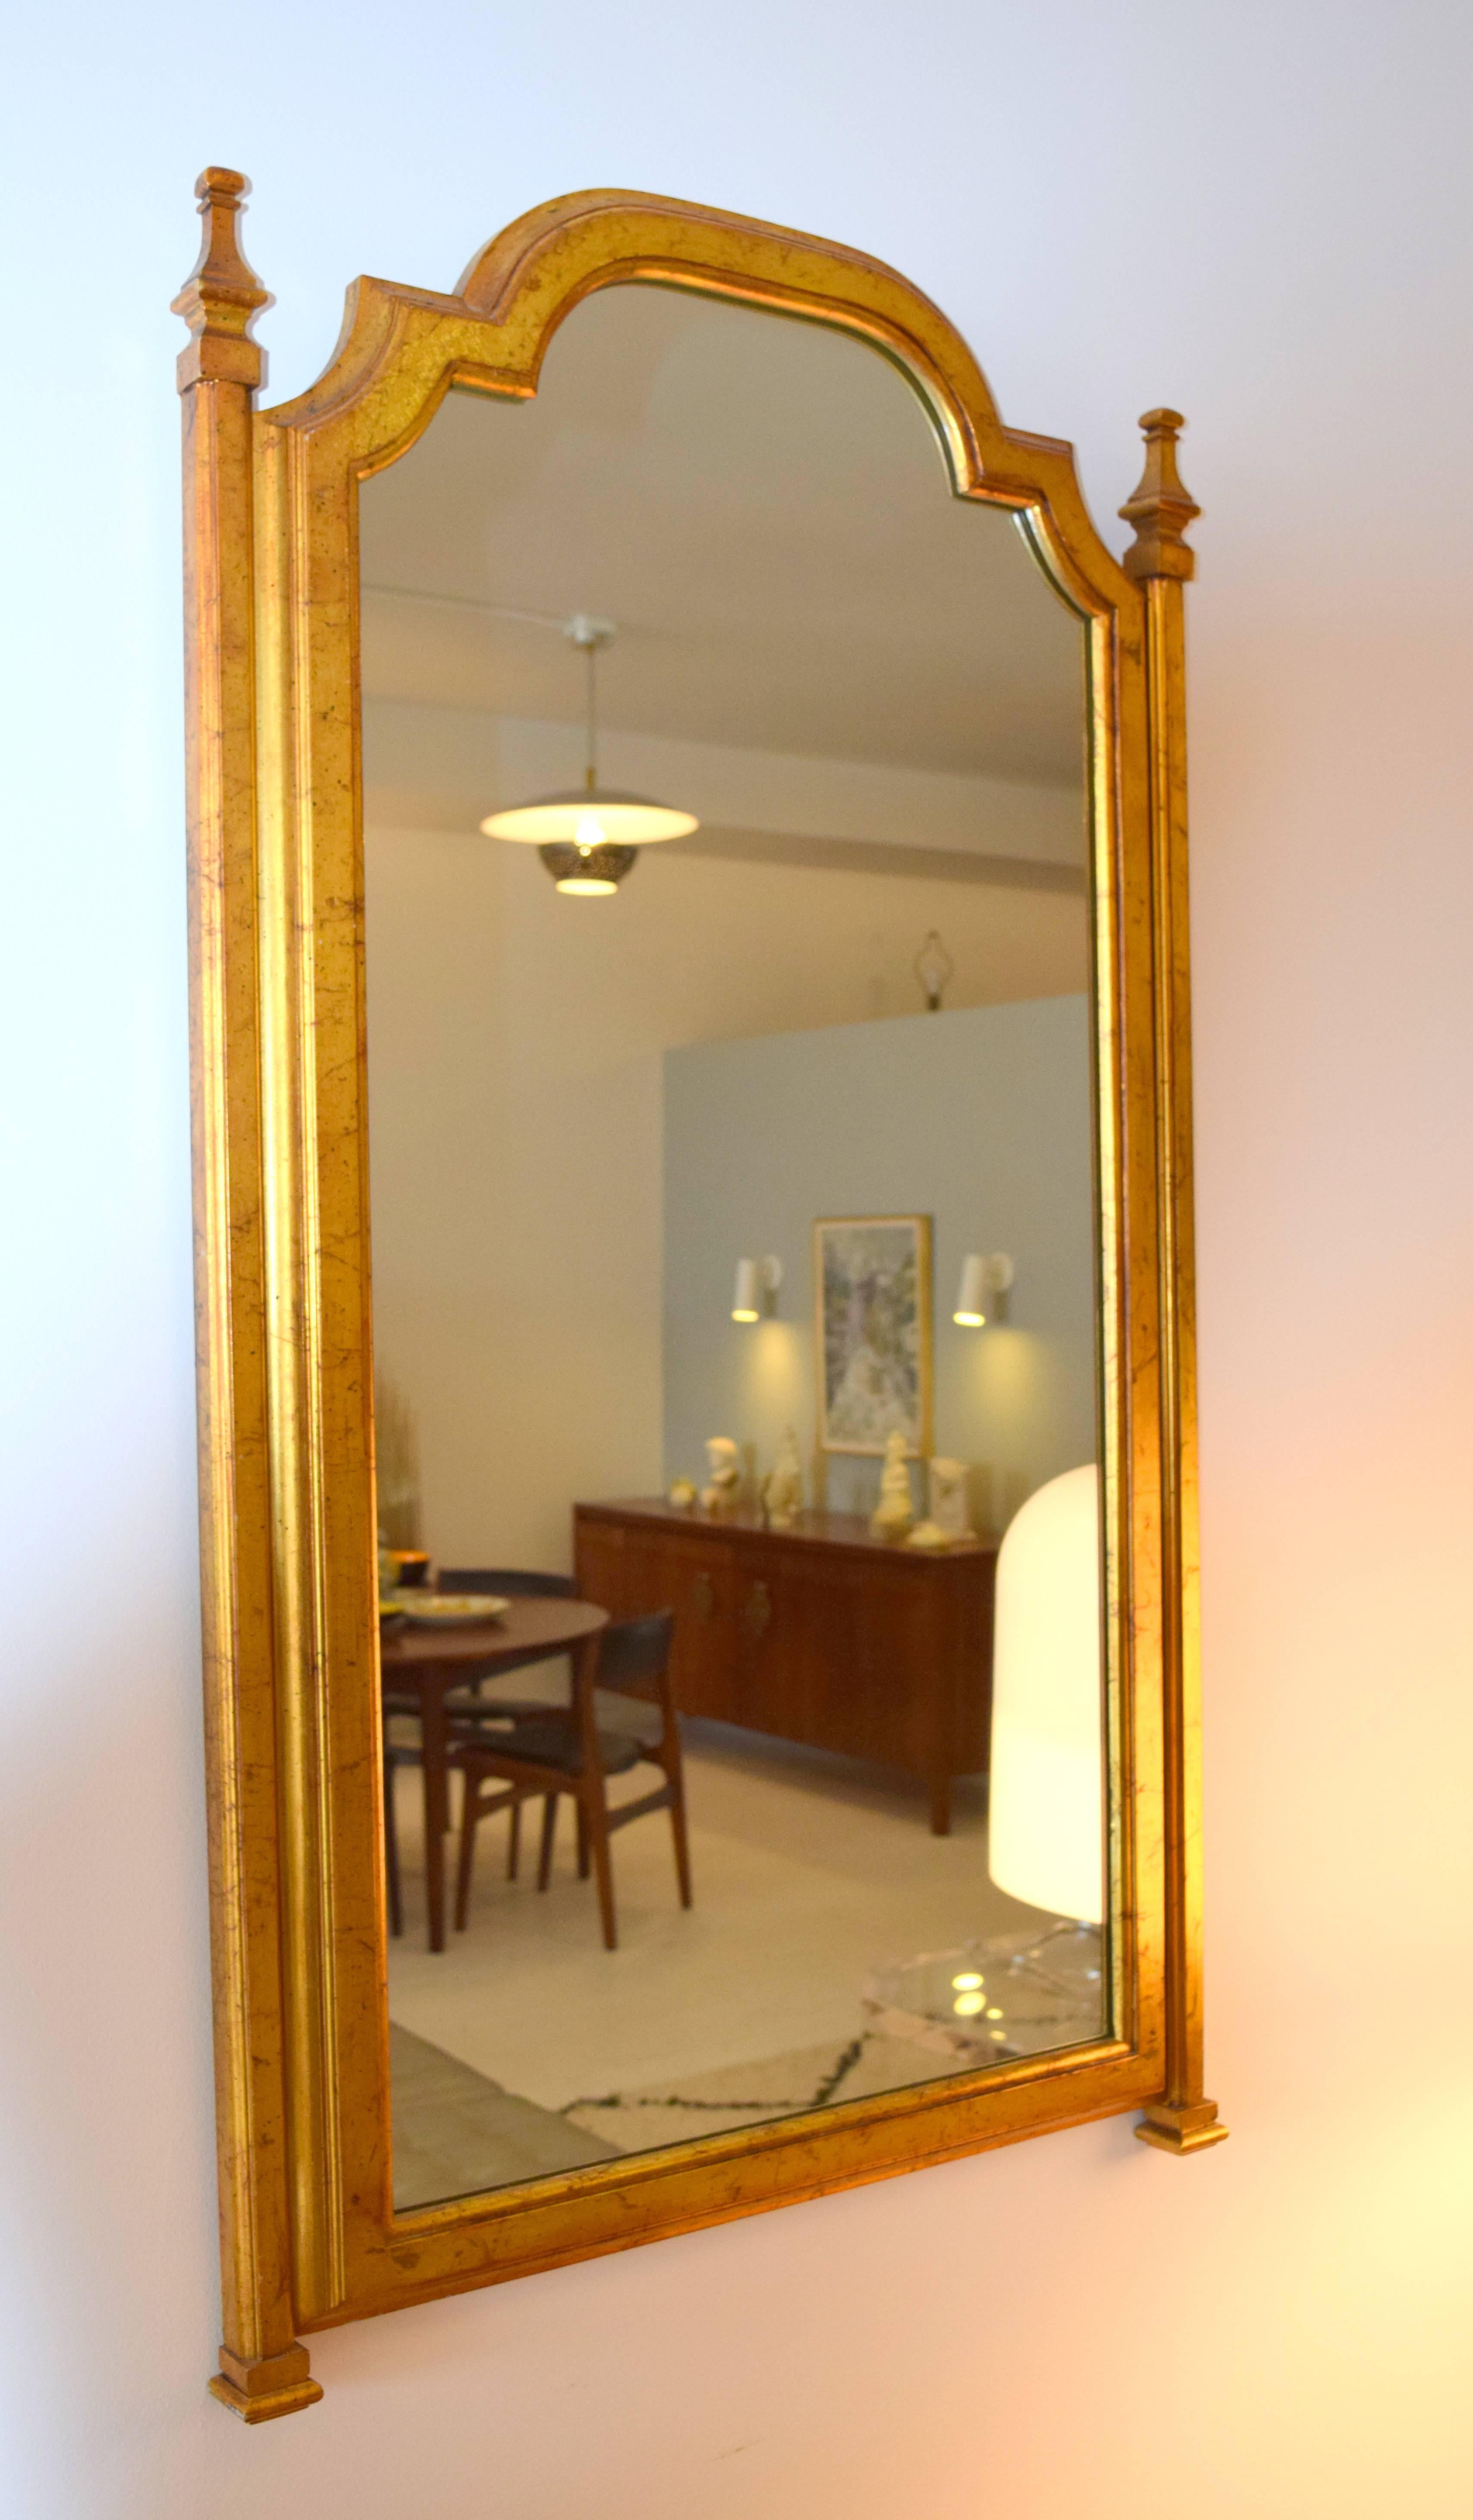 Regal gold leafed wood frame mirror with expressive form. Dramatic scale and gilt technique exudes quality and elegance.